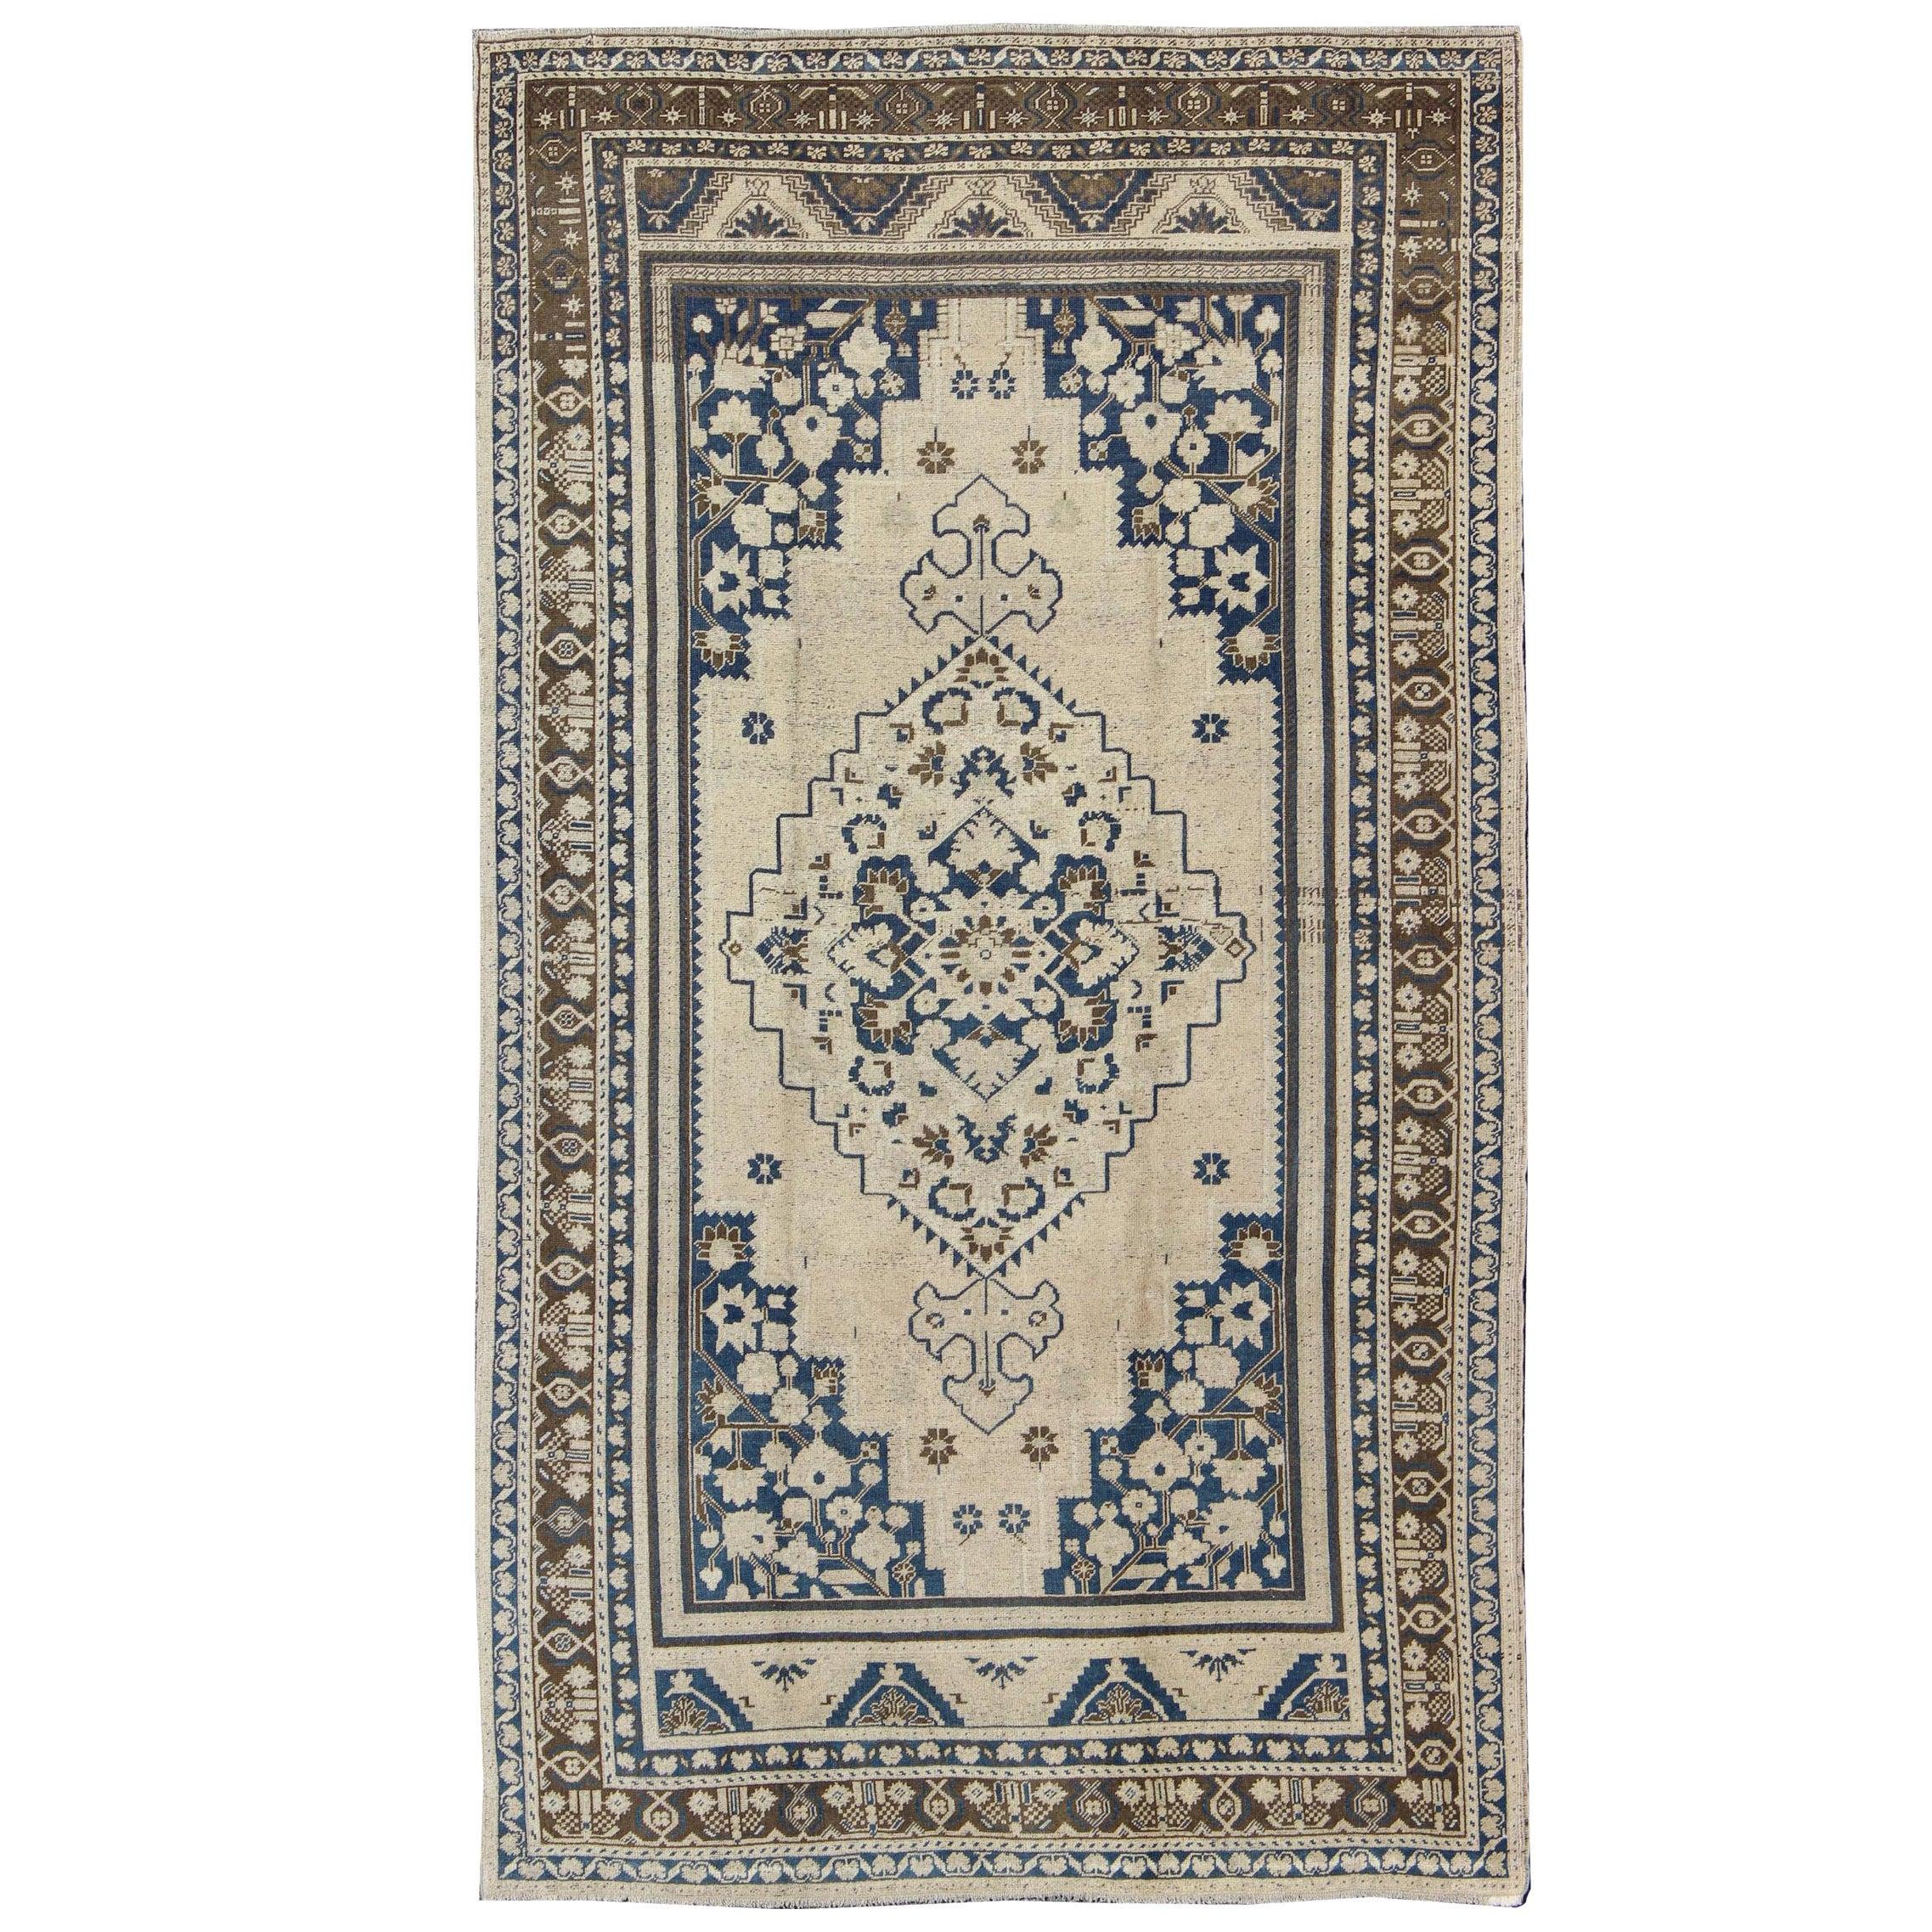 Vintage Turkish Oushak Rug with Denim Blue, Brown and Cream Colors For Sale